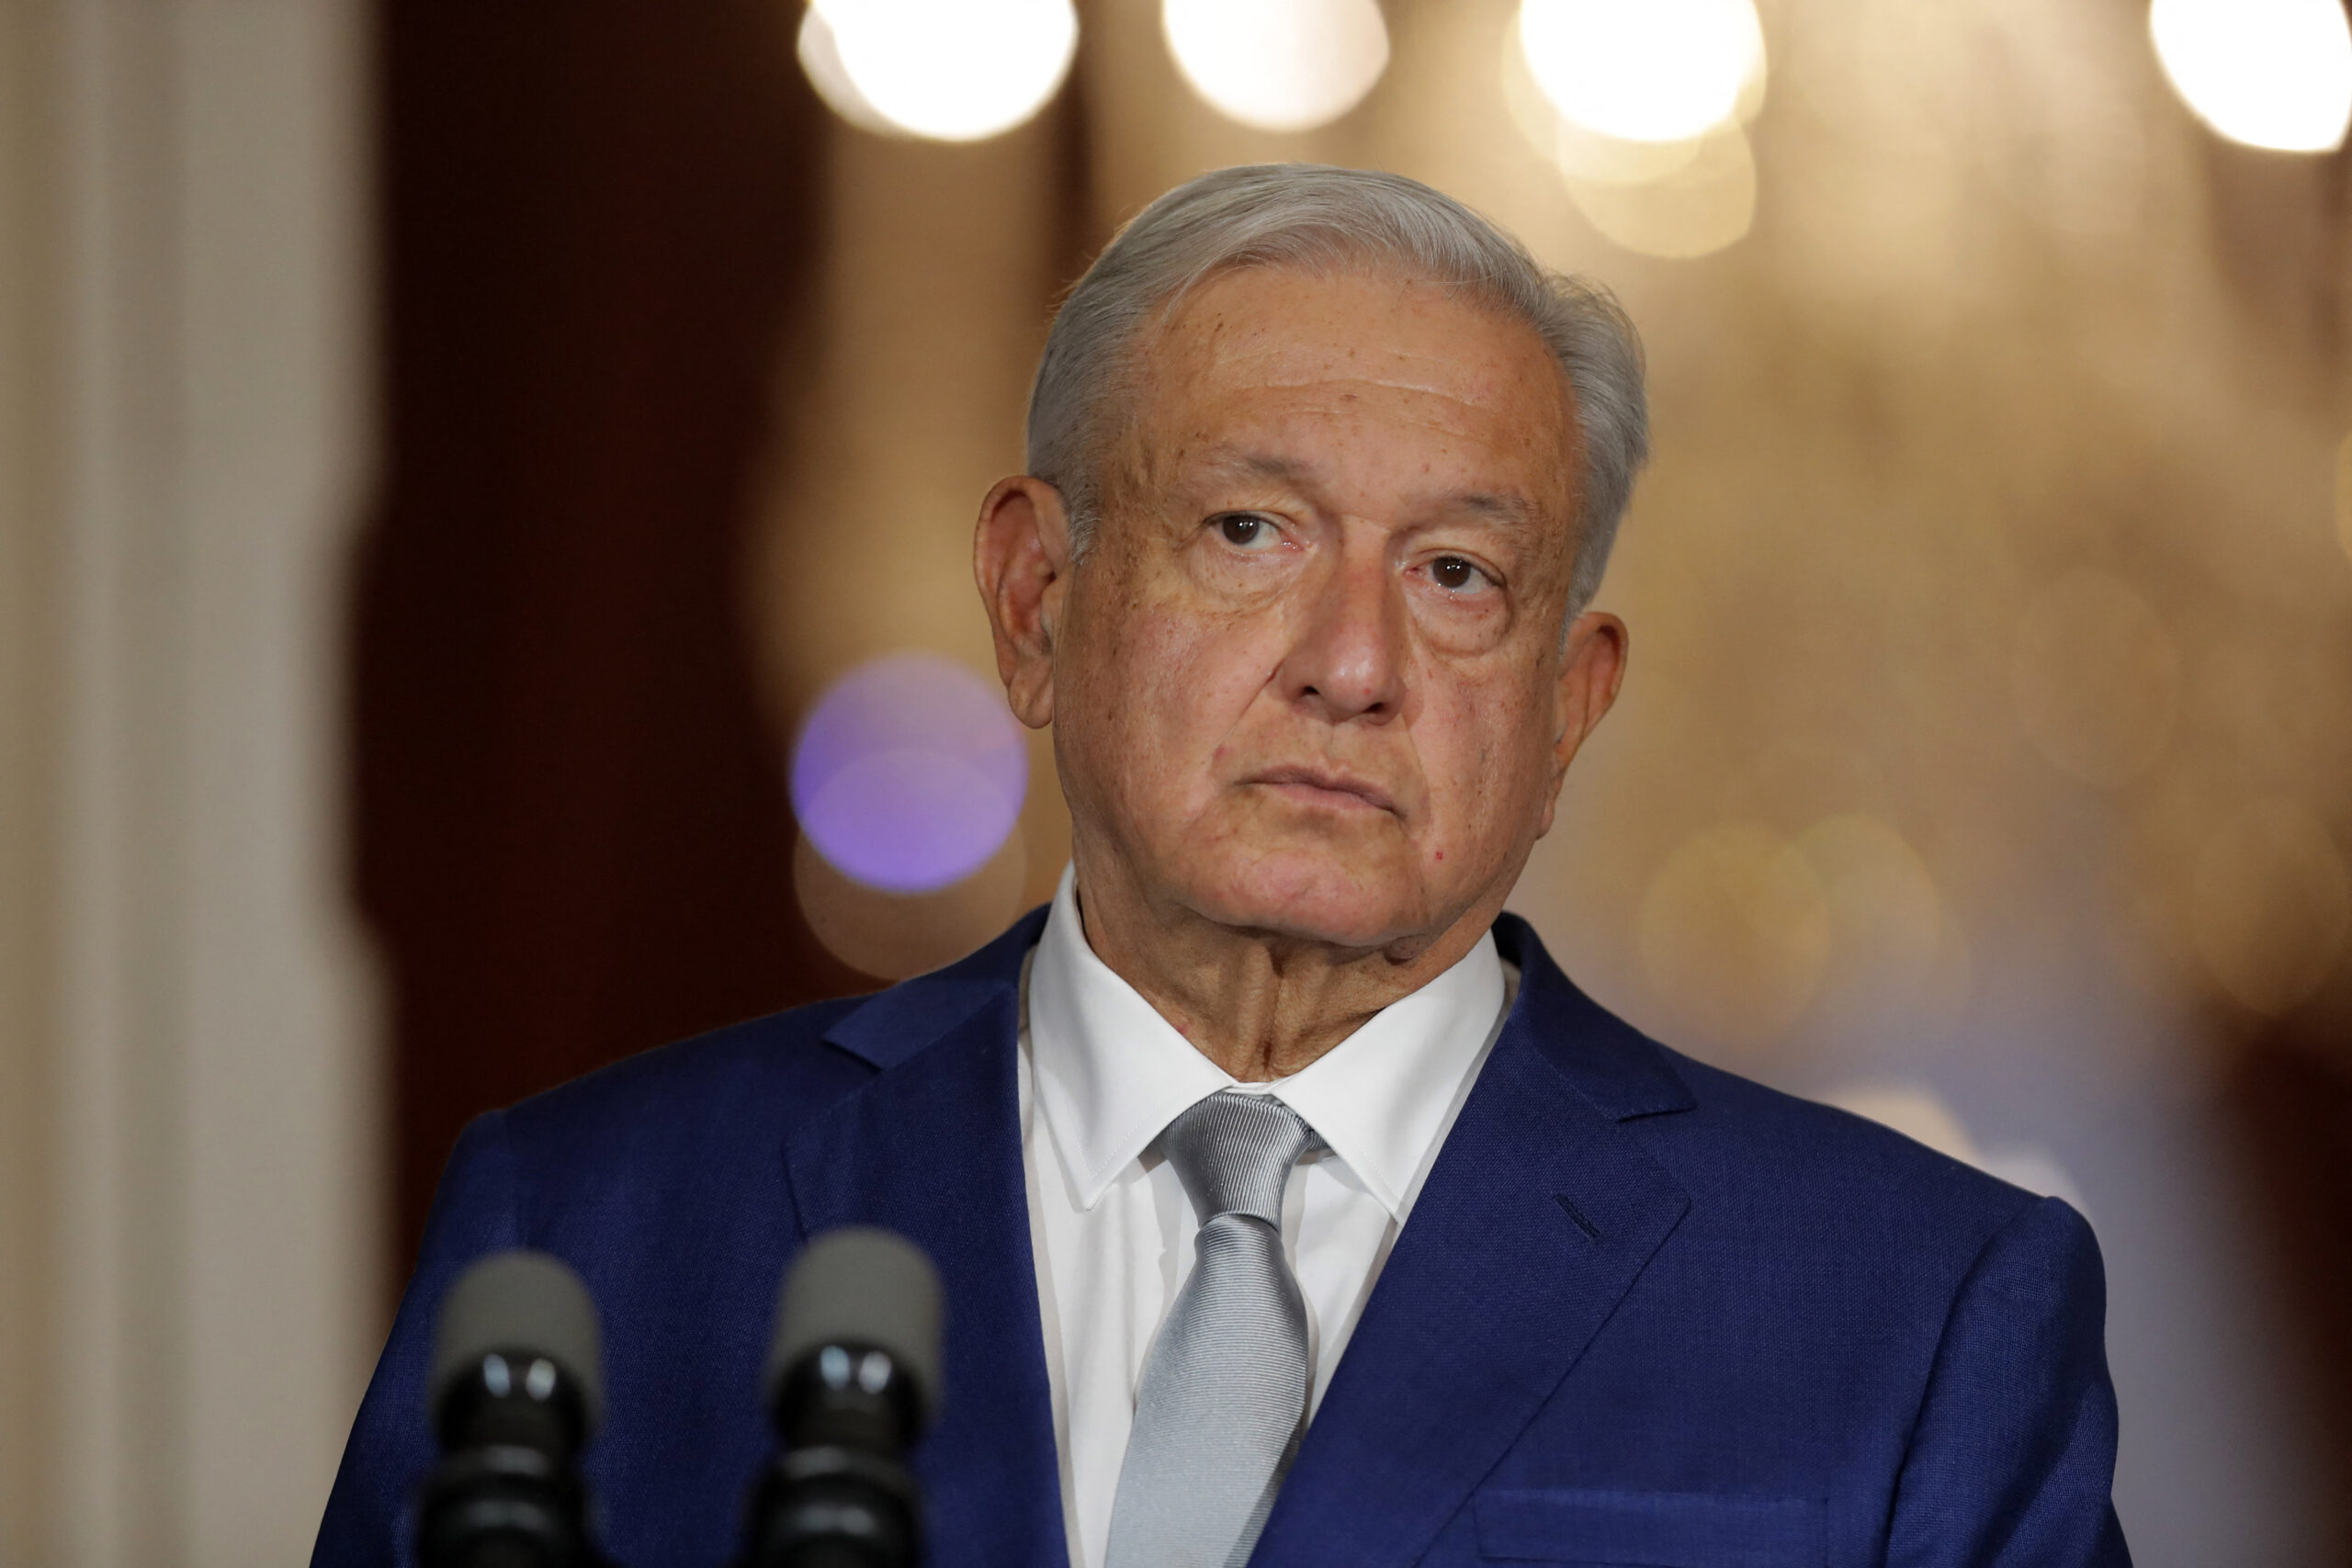 amlo-acknowledges-that-31-people-are-still-missing-after-hurricane-otis